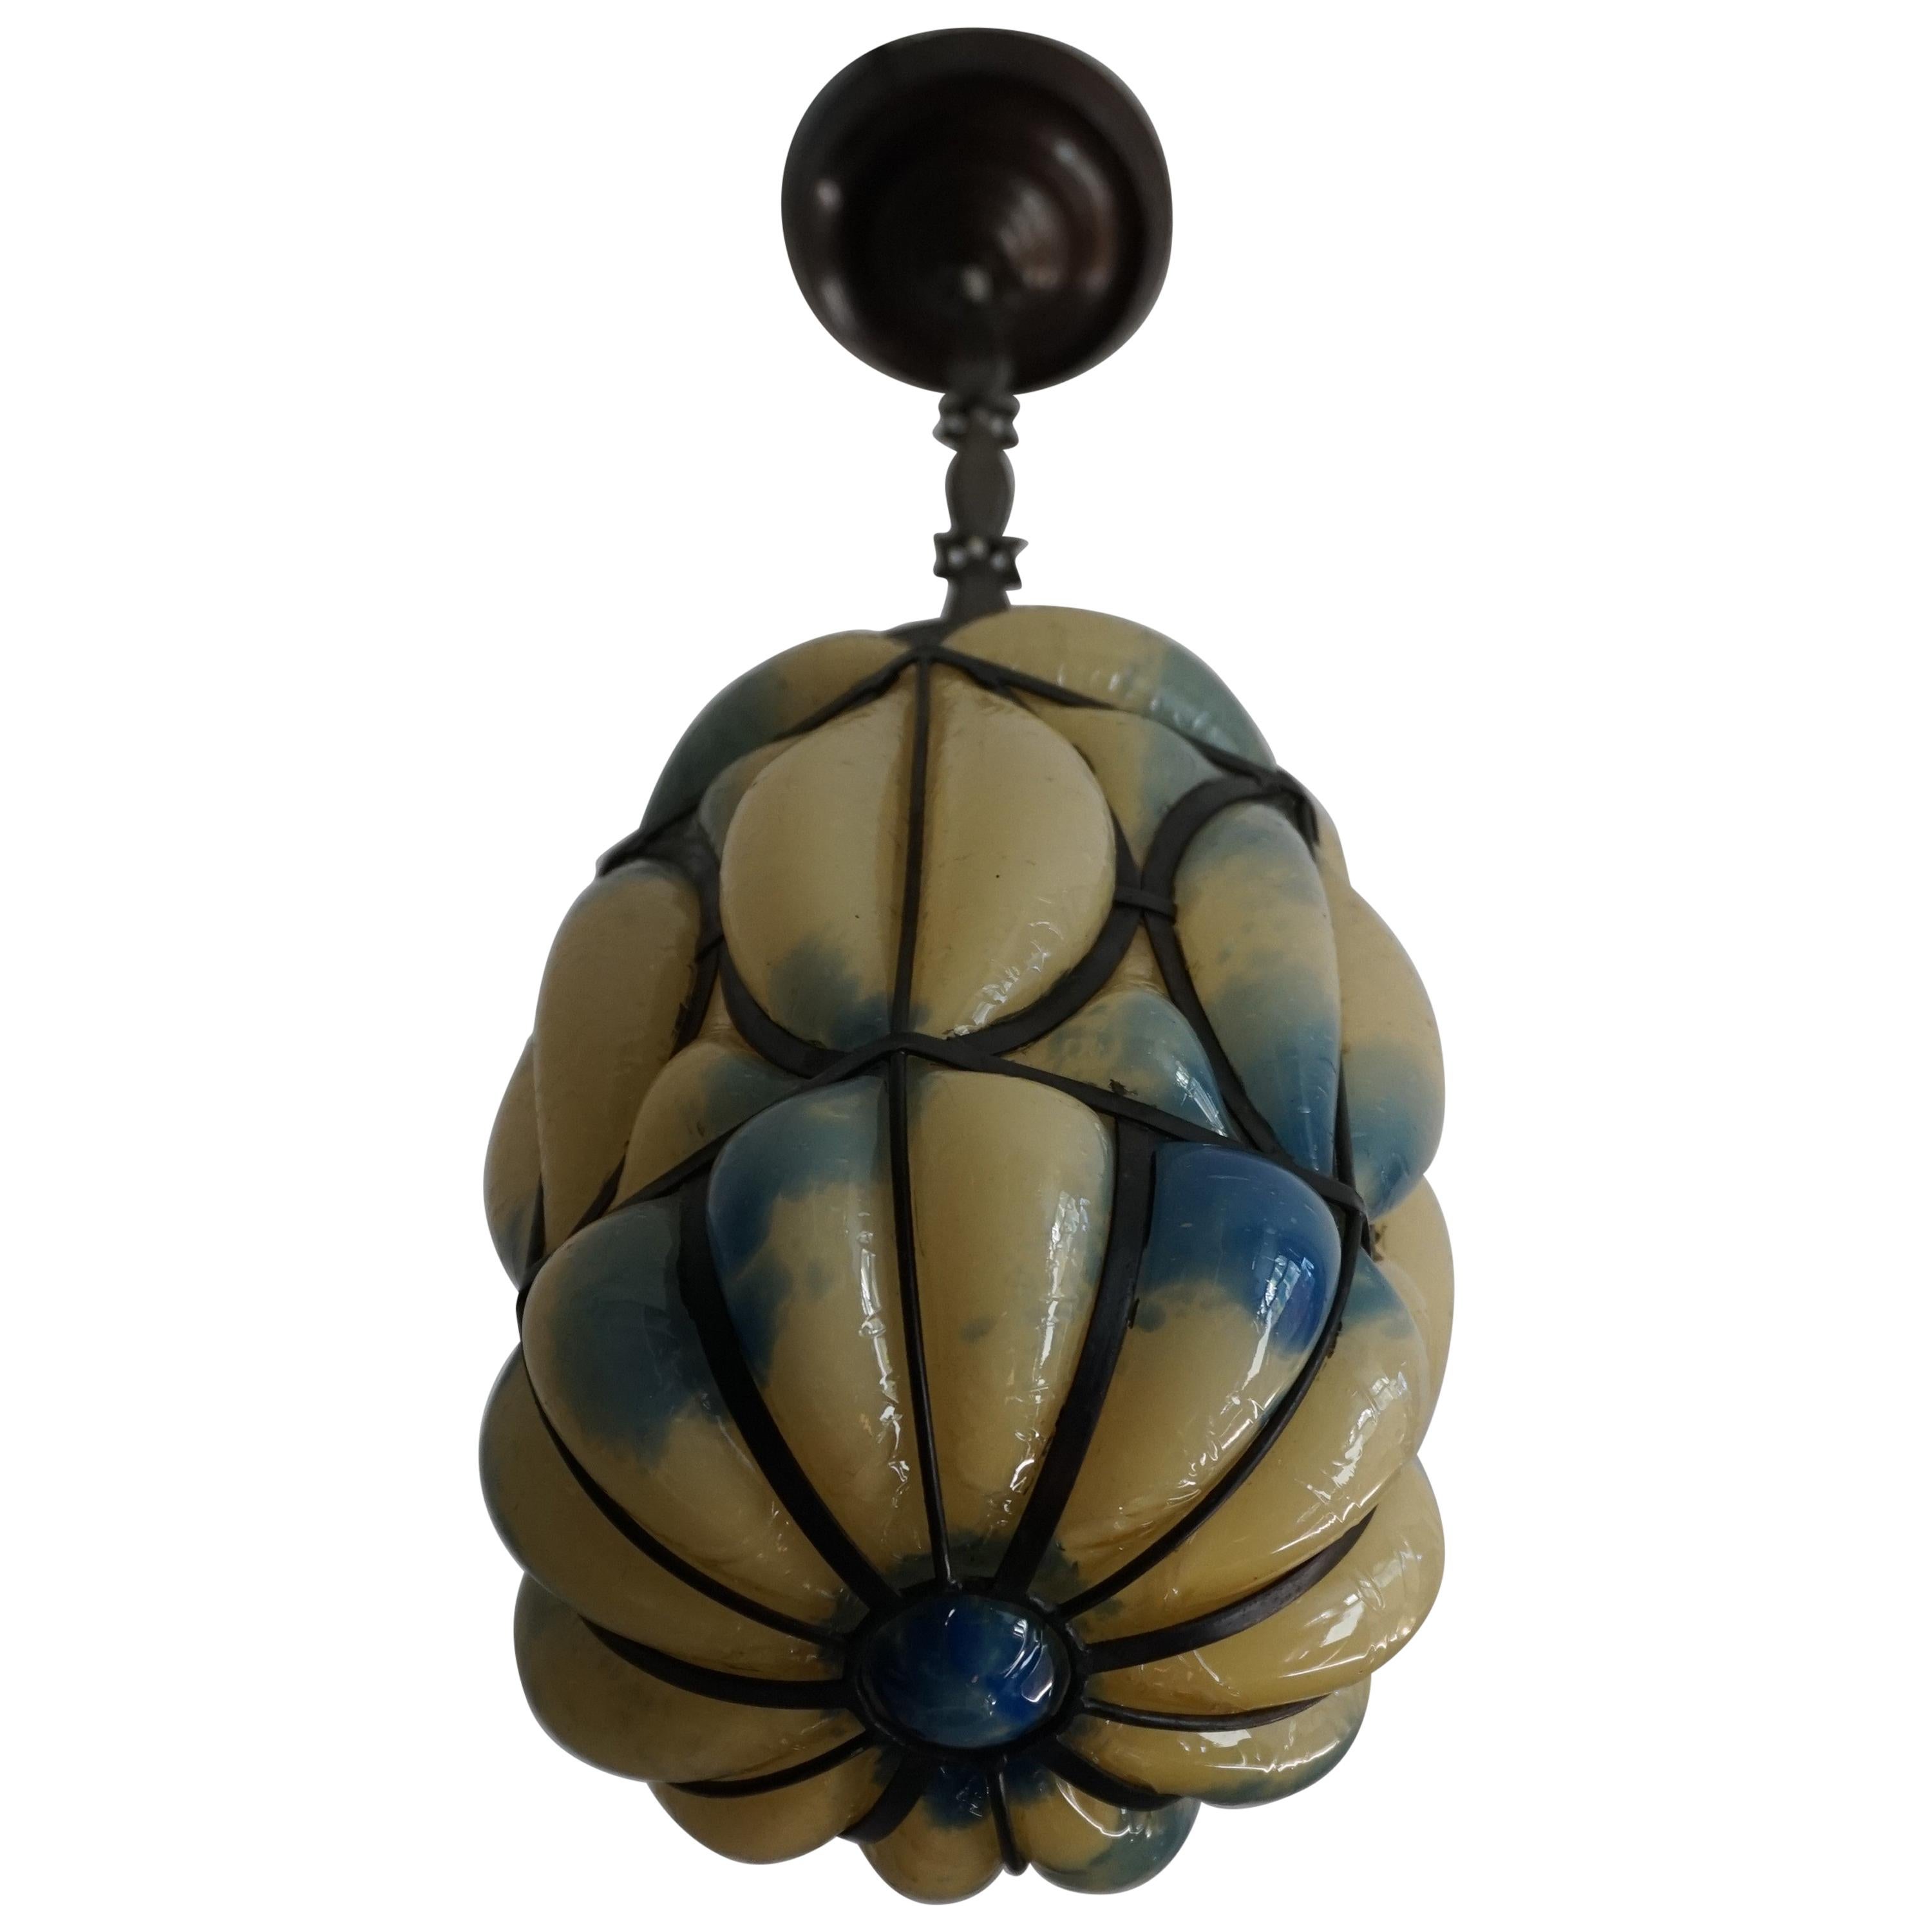 Very Cool and Pretty, Mouth Blown Venetian Murano Glass in Metal Frame Pendant